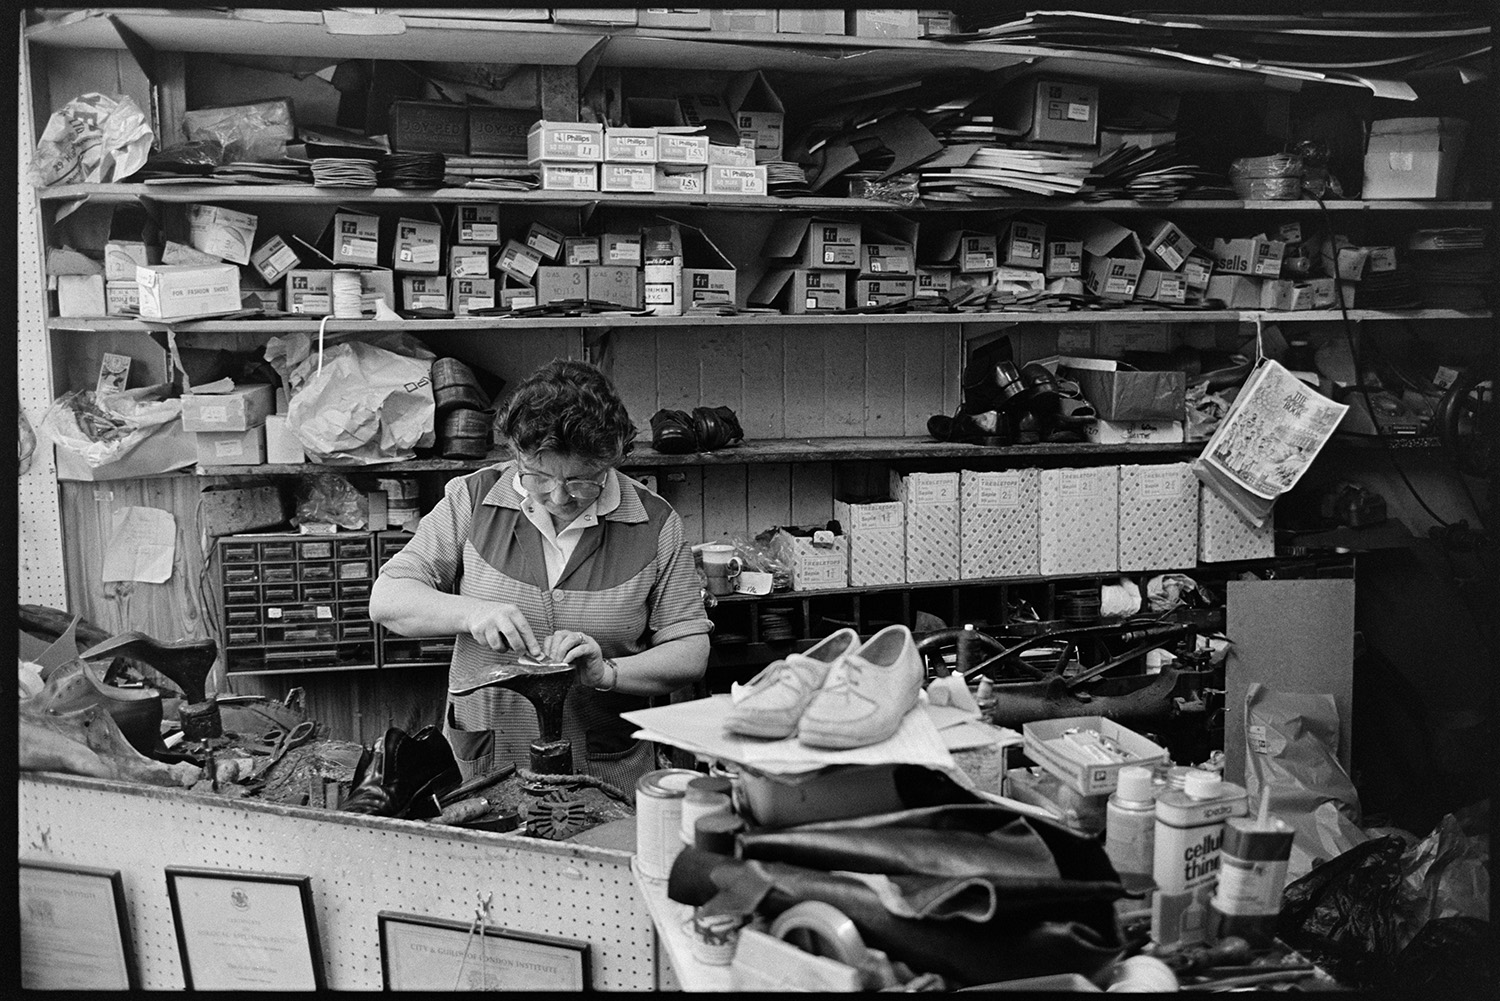 Man and woman shoemakers working in shoe repair shop. 
[Mrs Gale working on a shoe repair on top of a shoe mould in her shoe repair shop in Boutport Street, Barnstaple. Shoe boxes can be seen stacked on shelves in the background.]